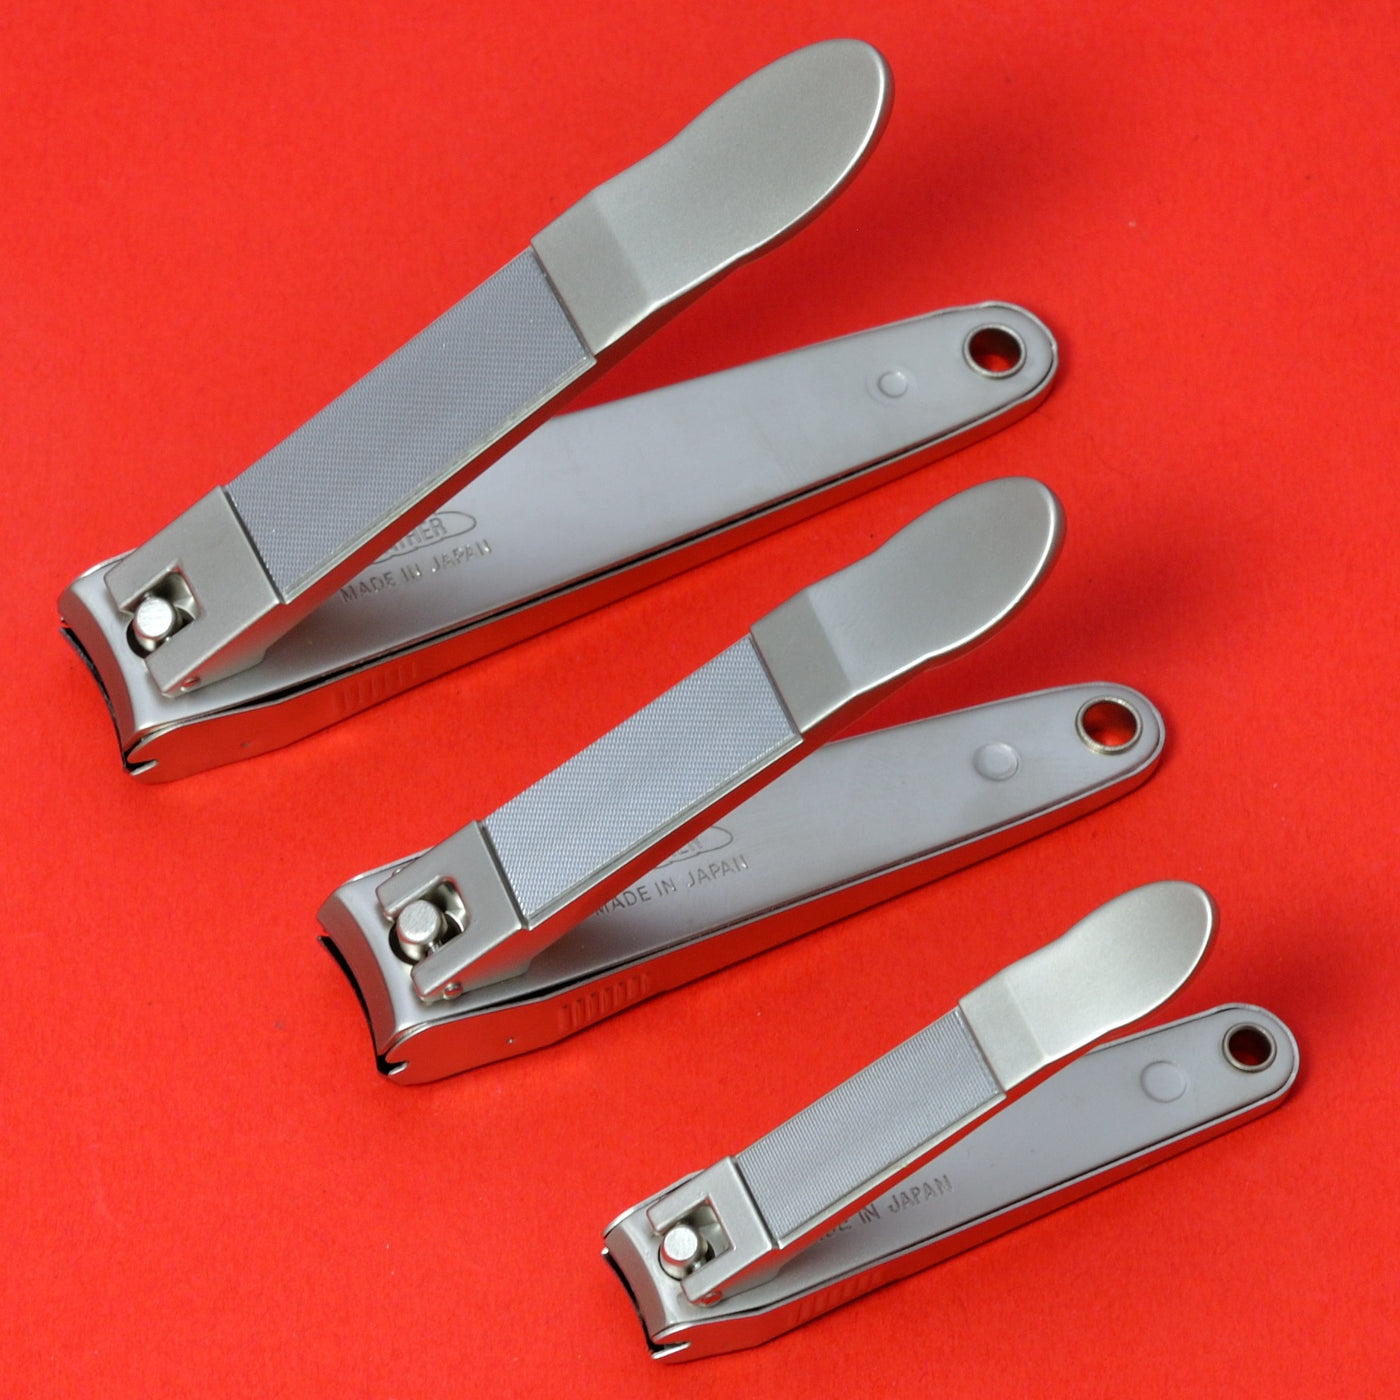 Foot Nail Clippers with Nail Catcher, White- Made in Germany